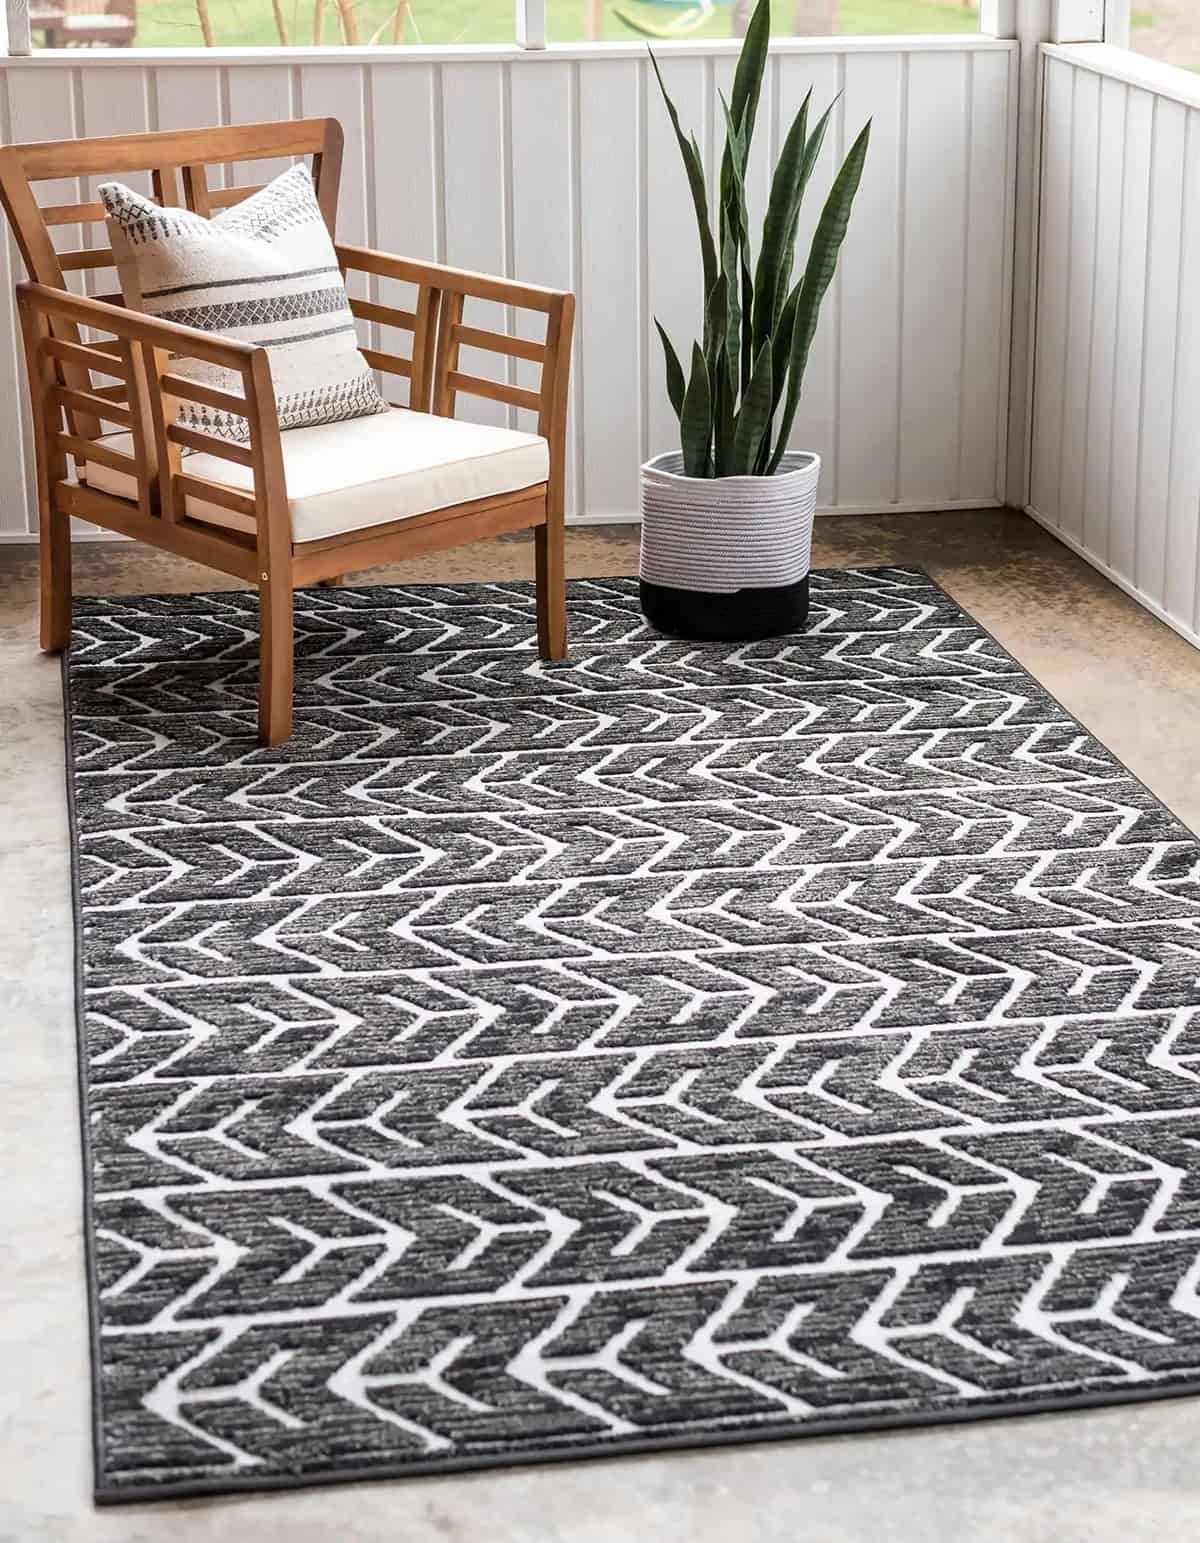 Benefits of a Ruggable Rug